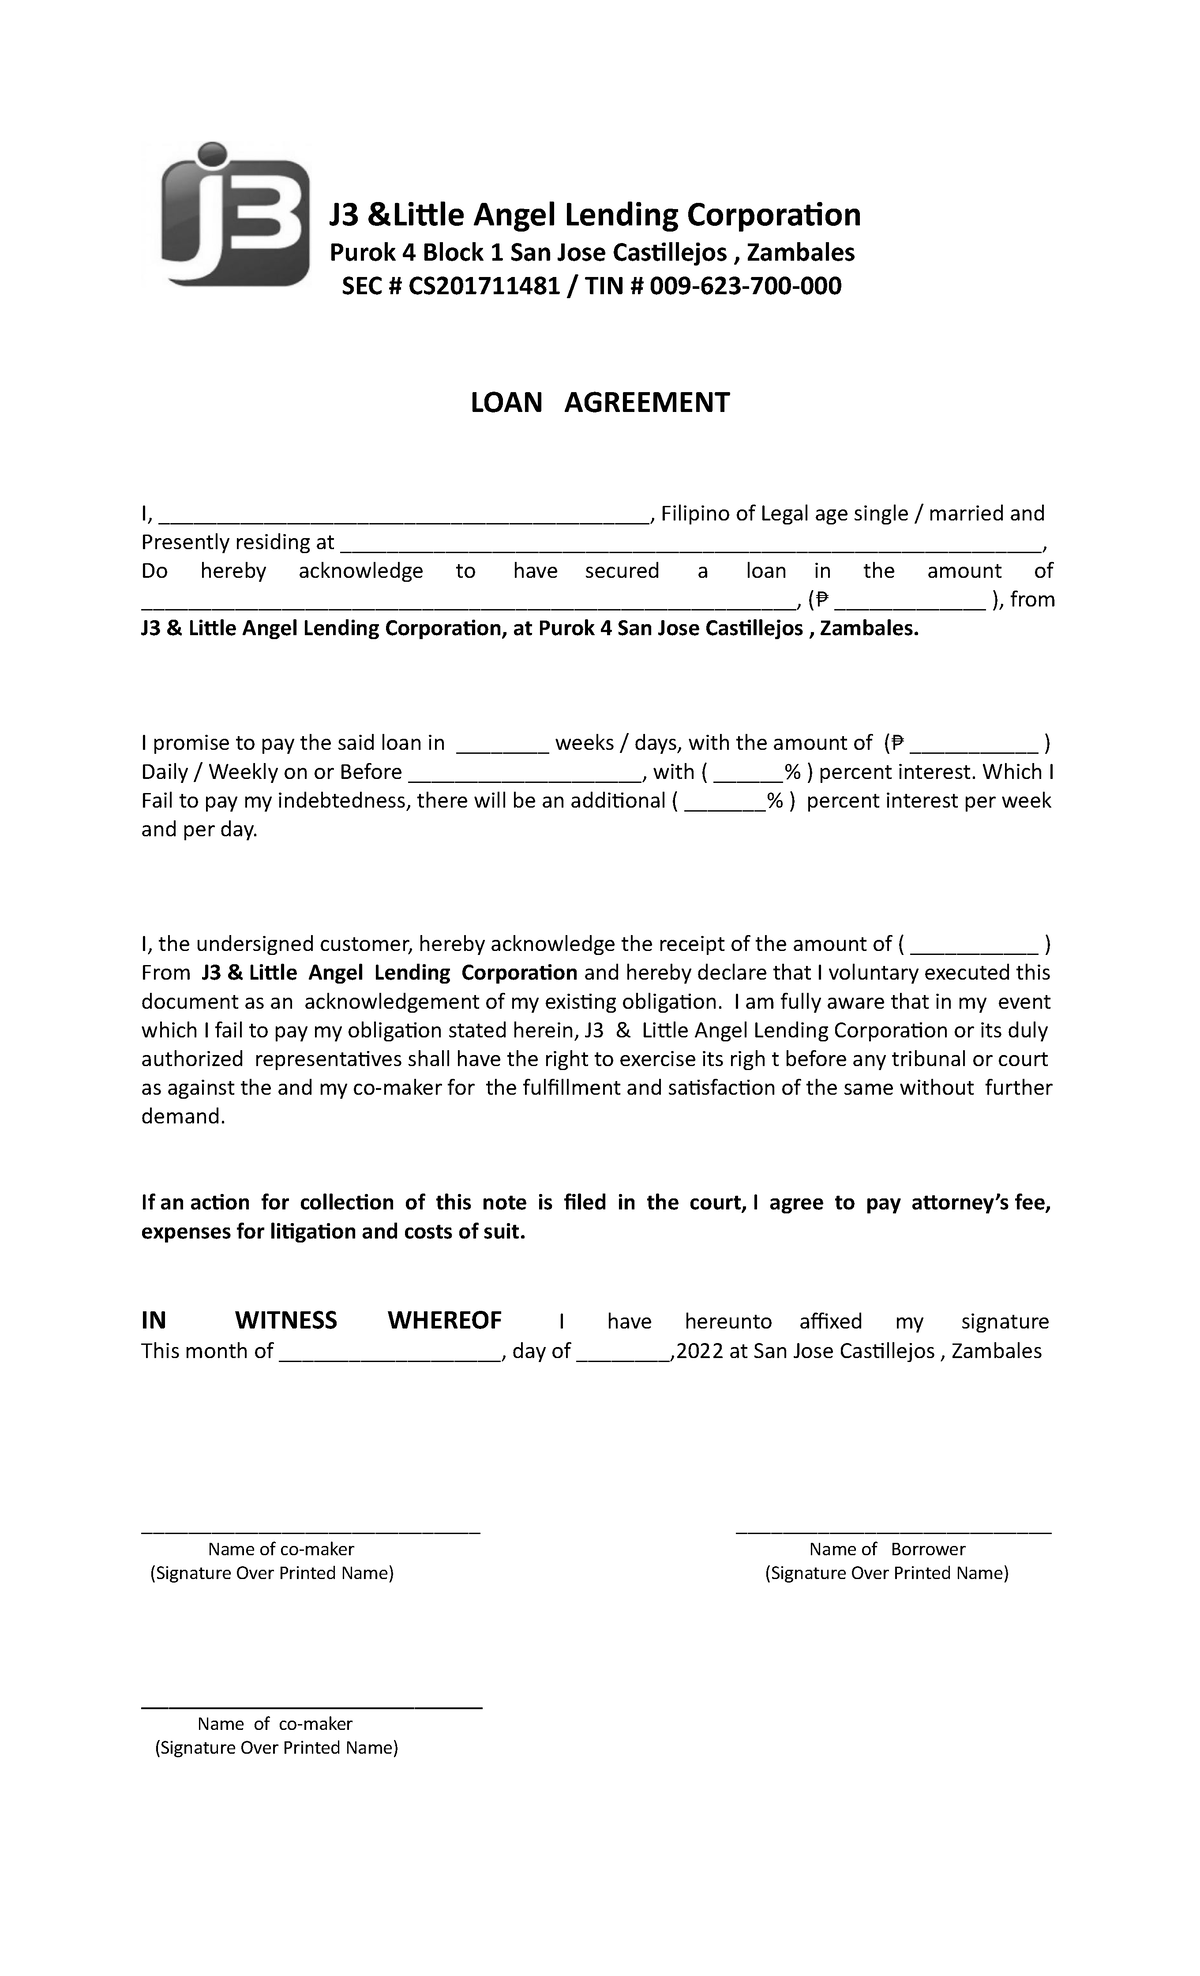 New loan agreement Tutorial about on the job training if it is all